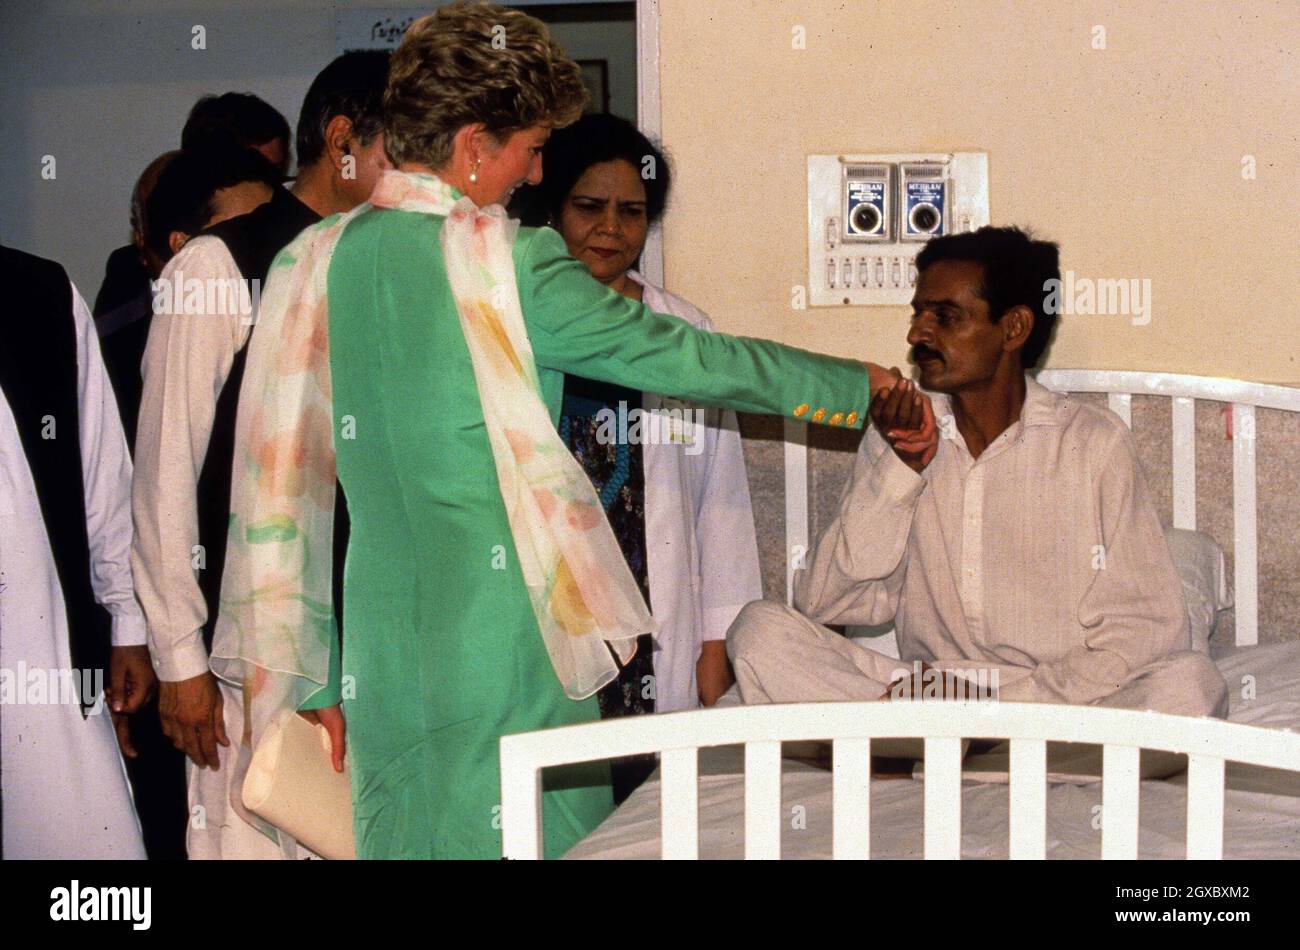 Diana, Princess of Wales is kissed on the hand by a paatient as she visits a detox centre in Lahore, Pakistan in October 1991. Anwar Hussein/EMPICS Entertainment  Stock Photo